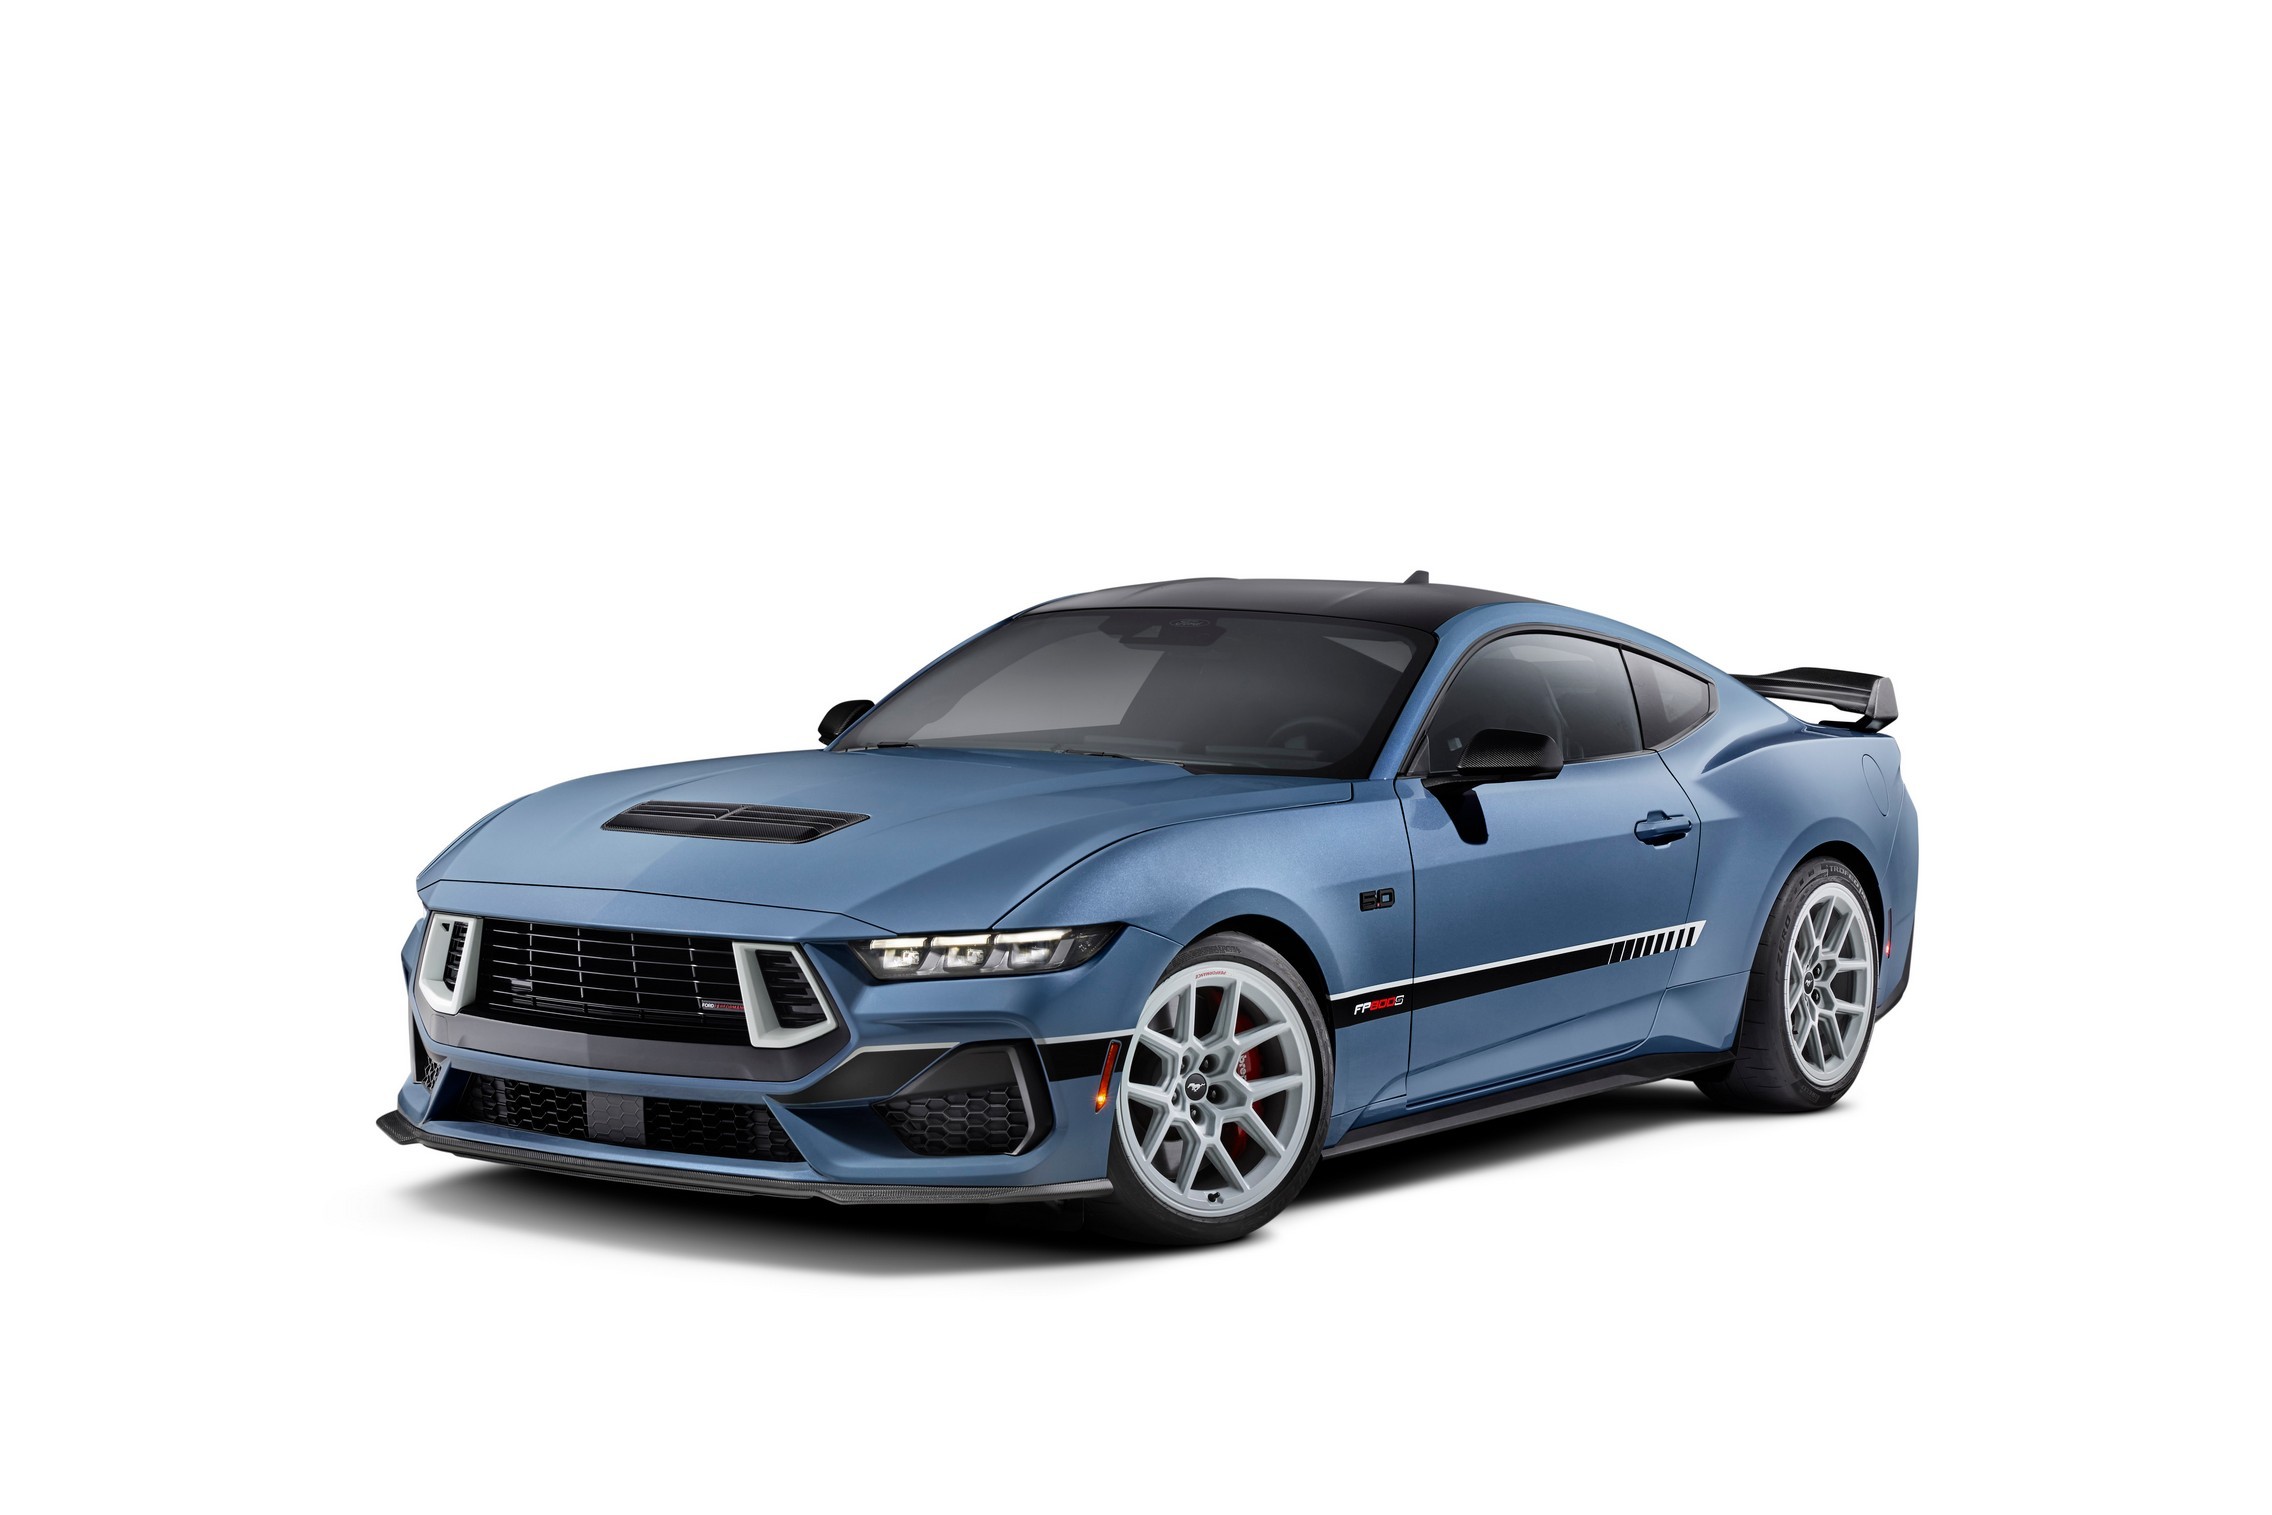 Ford Rendered the Mustang GTD and Nissan the Porsche 911 Dakar